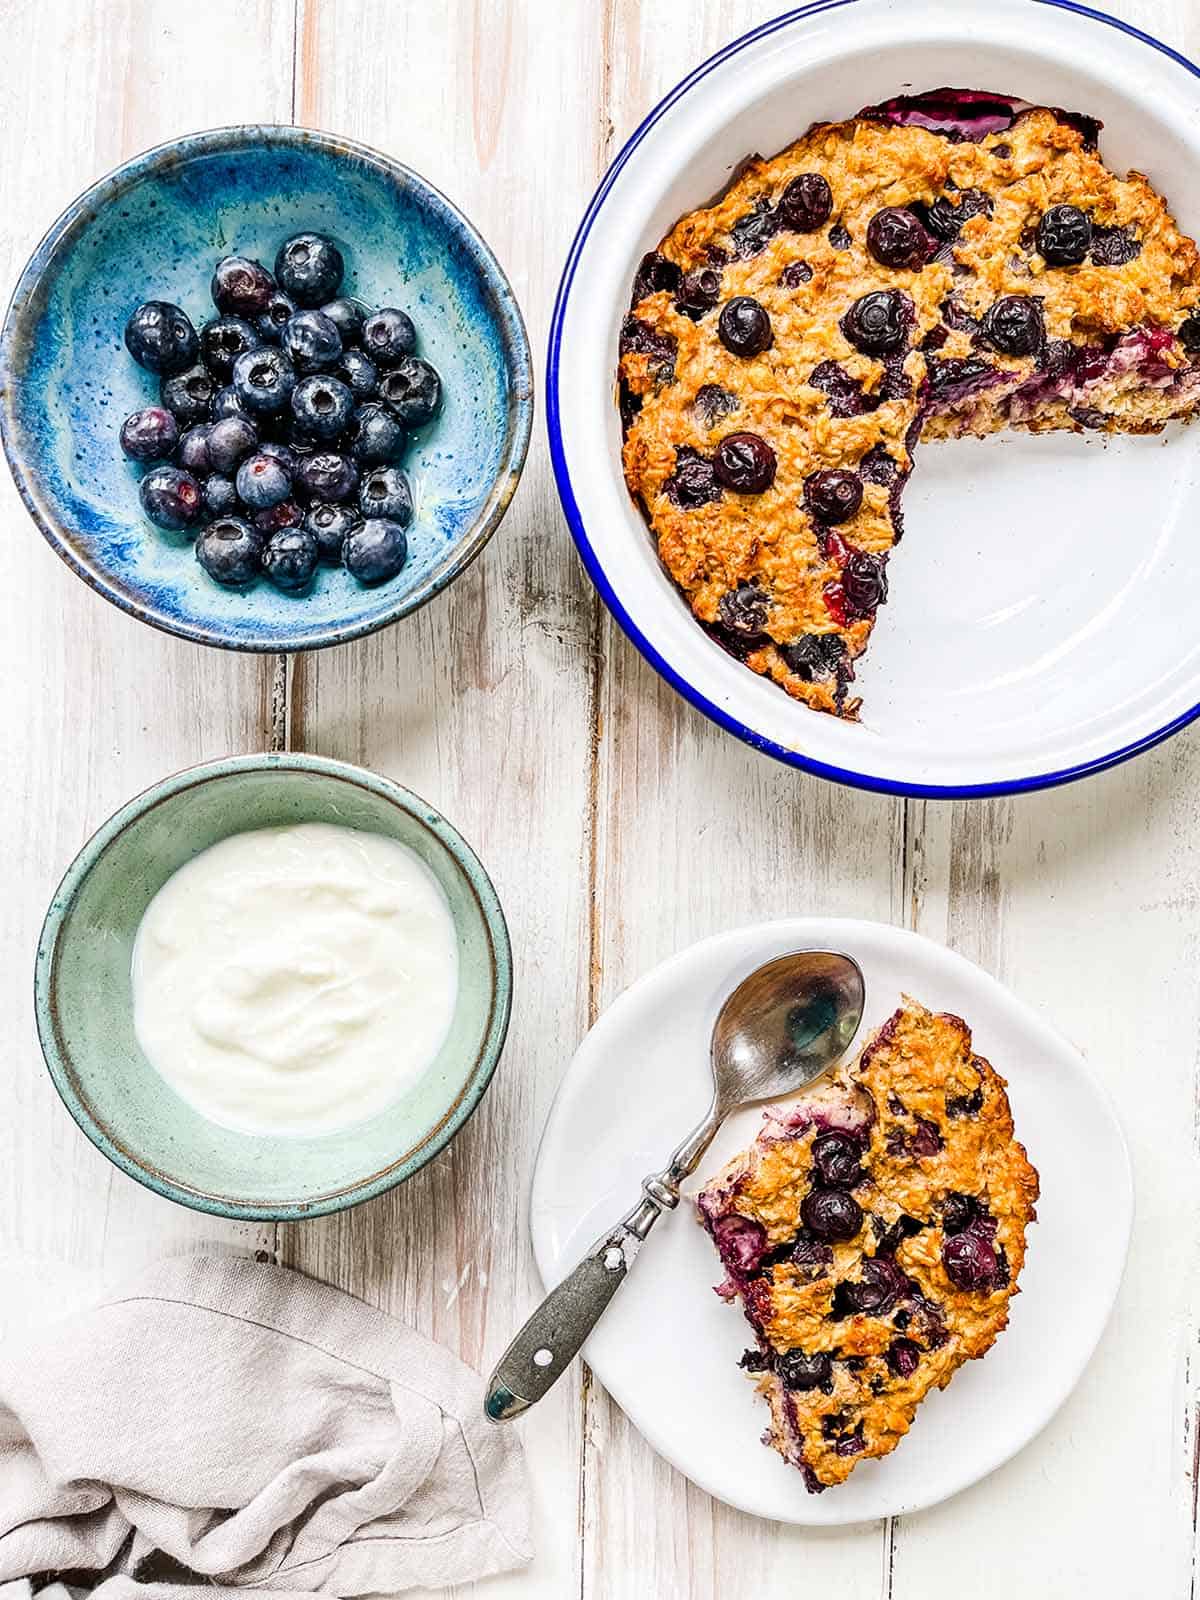 A white table with a dish of baked oatmeal and blueberries.